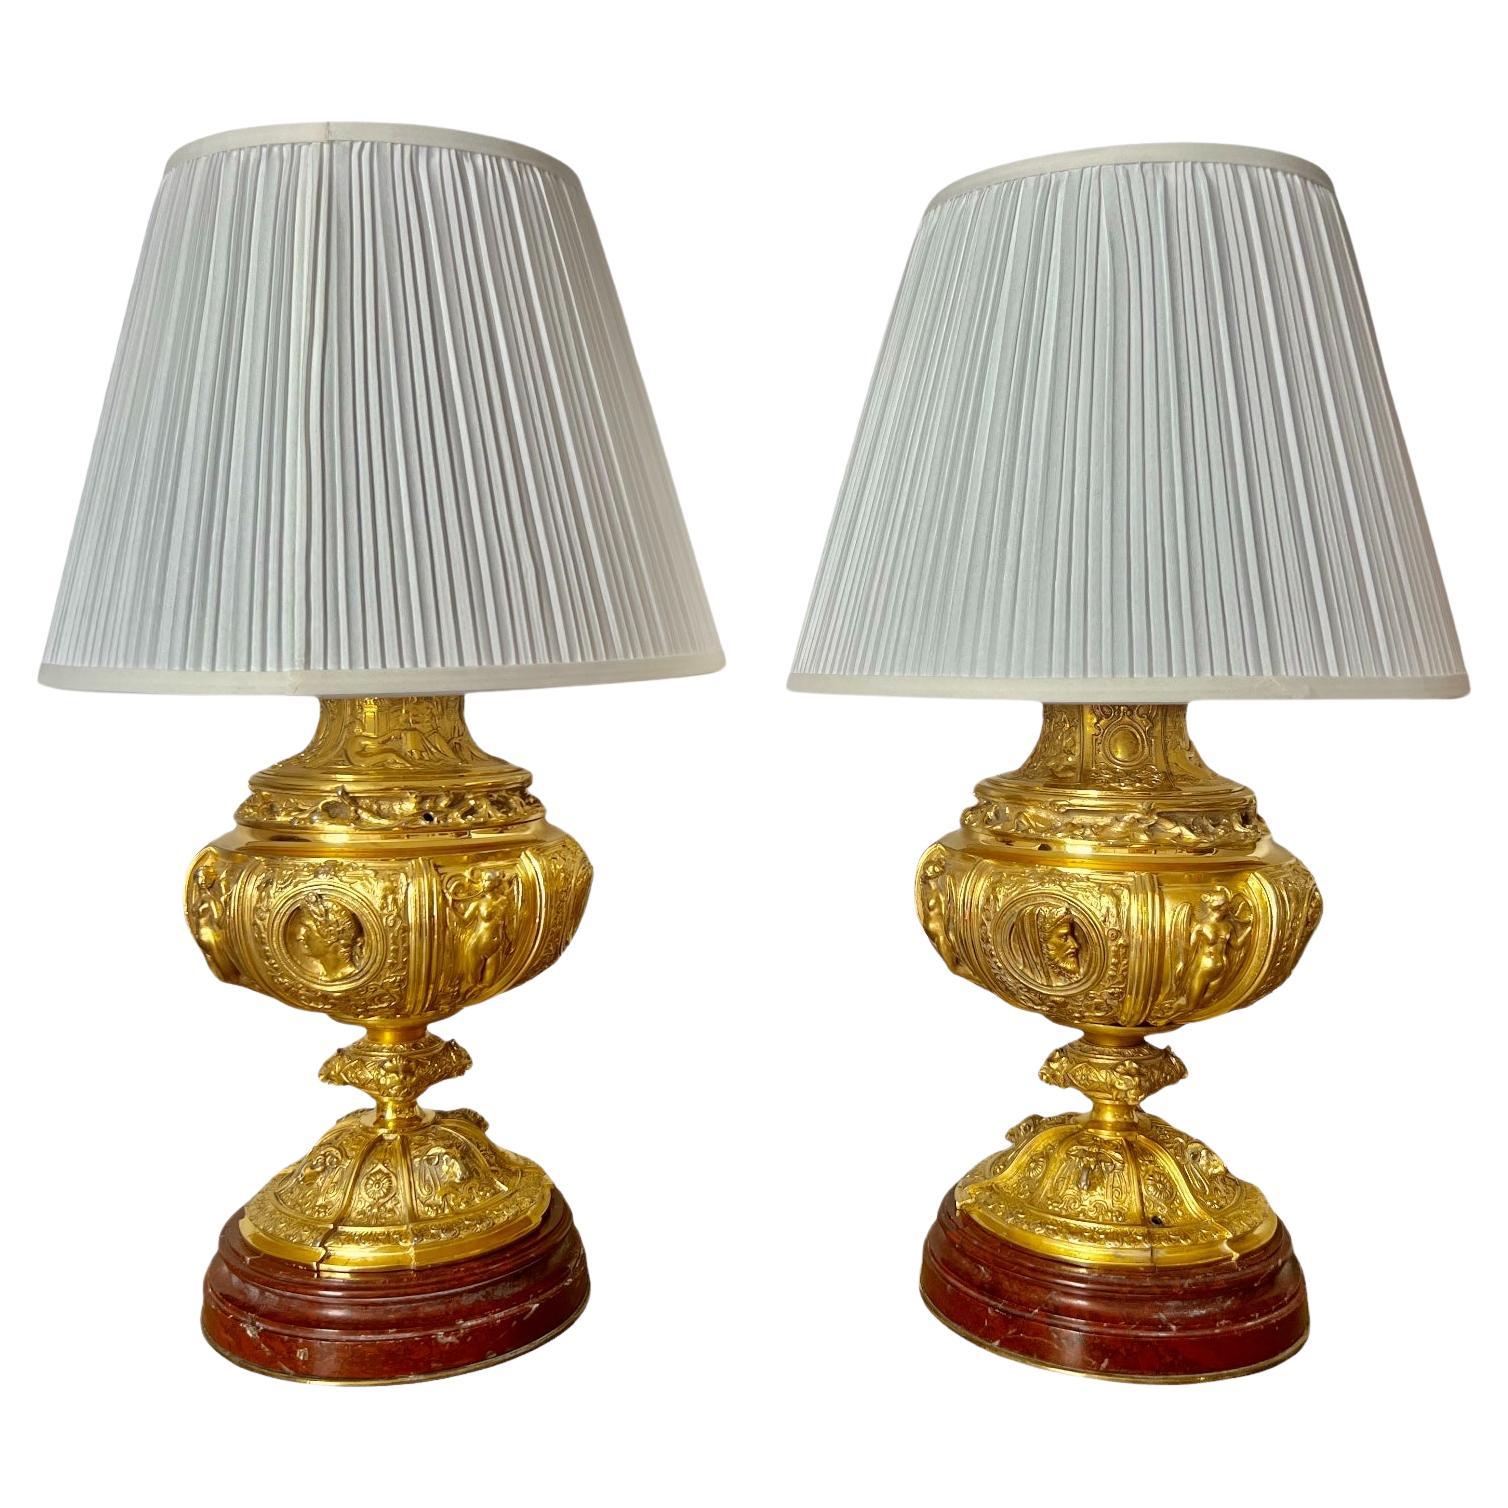 19th Century Pair of Gilt Bronze Lamps with Red Griotte Marble Bases